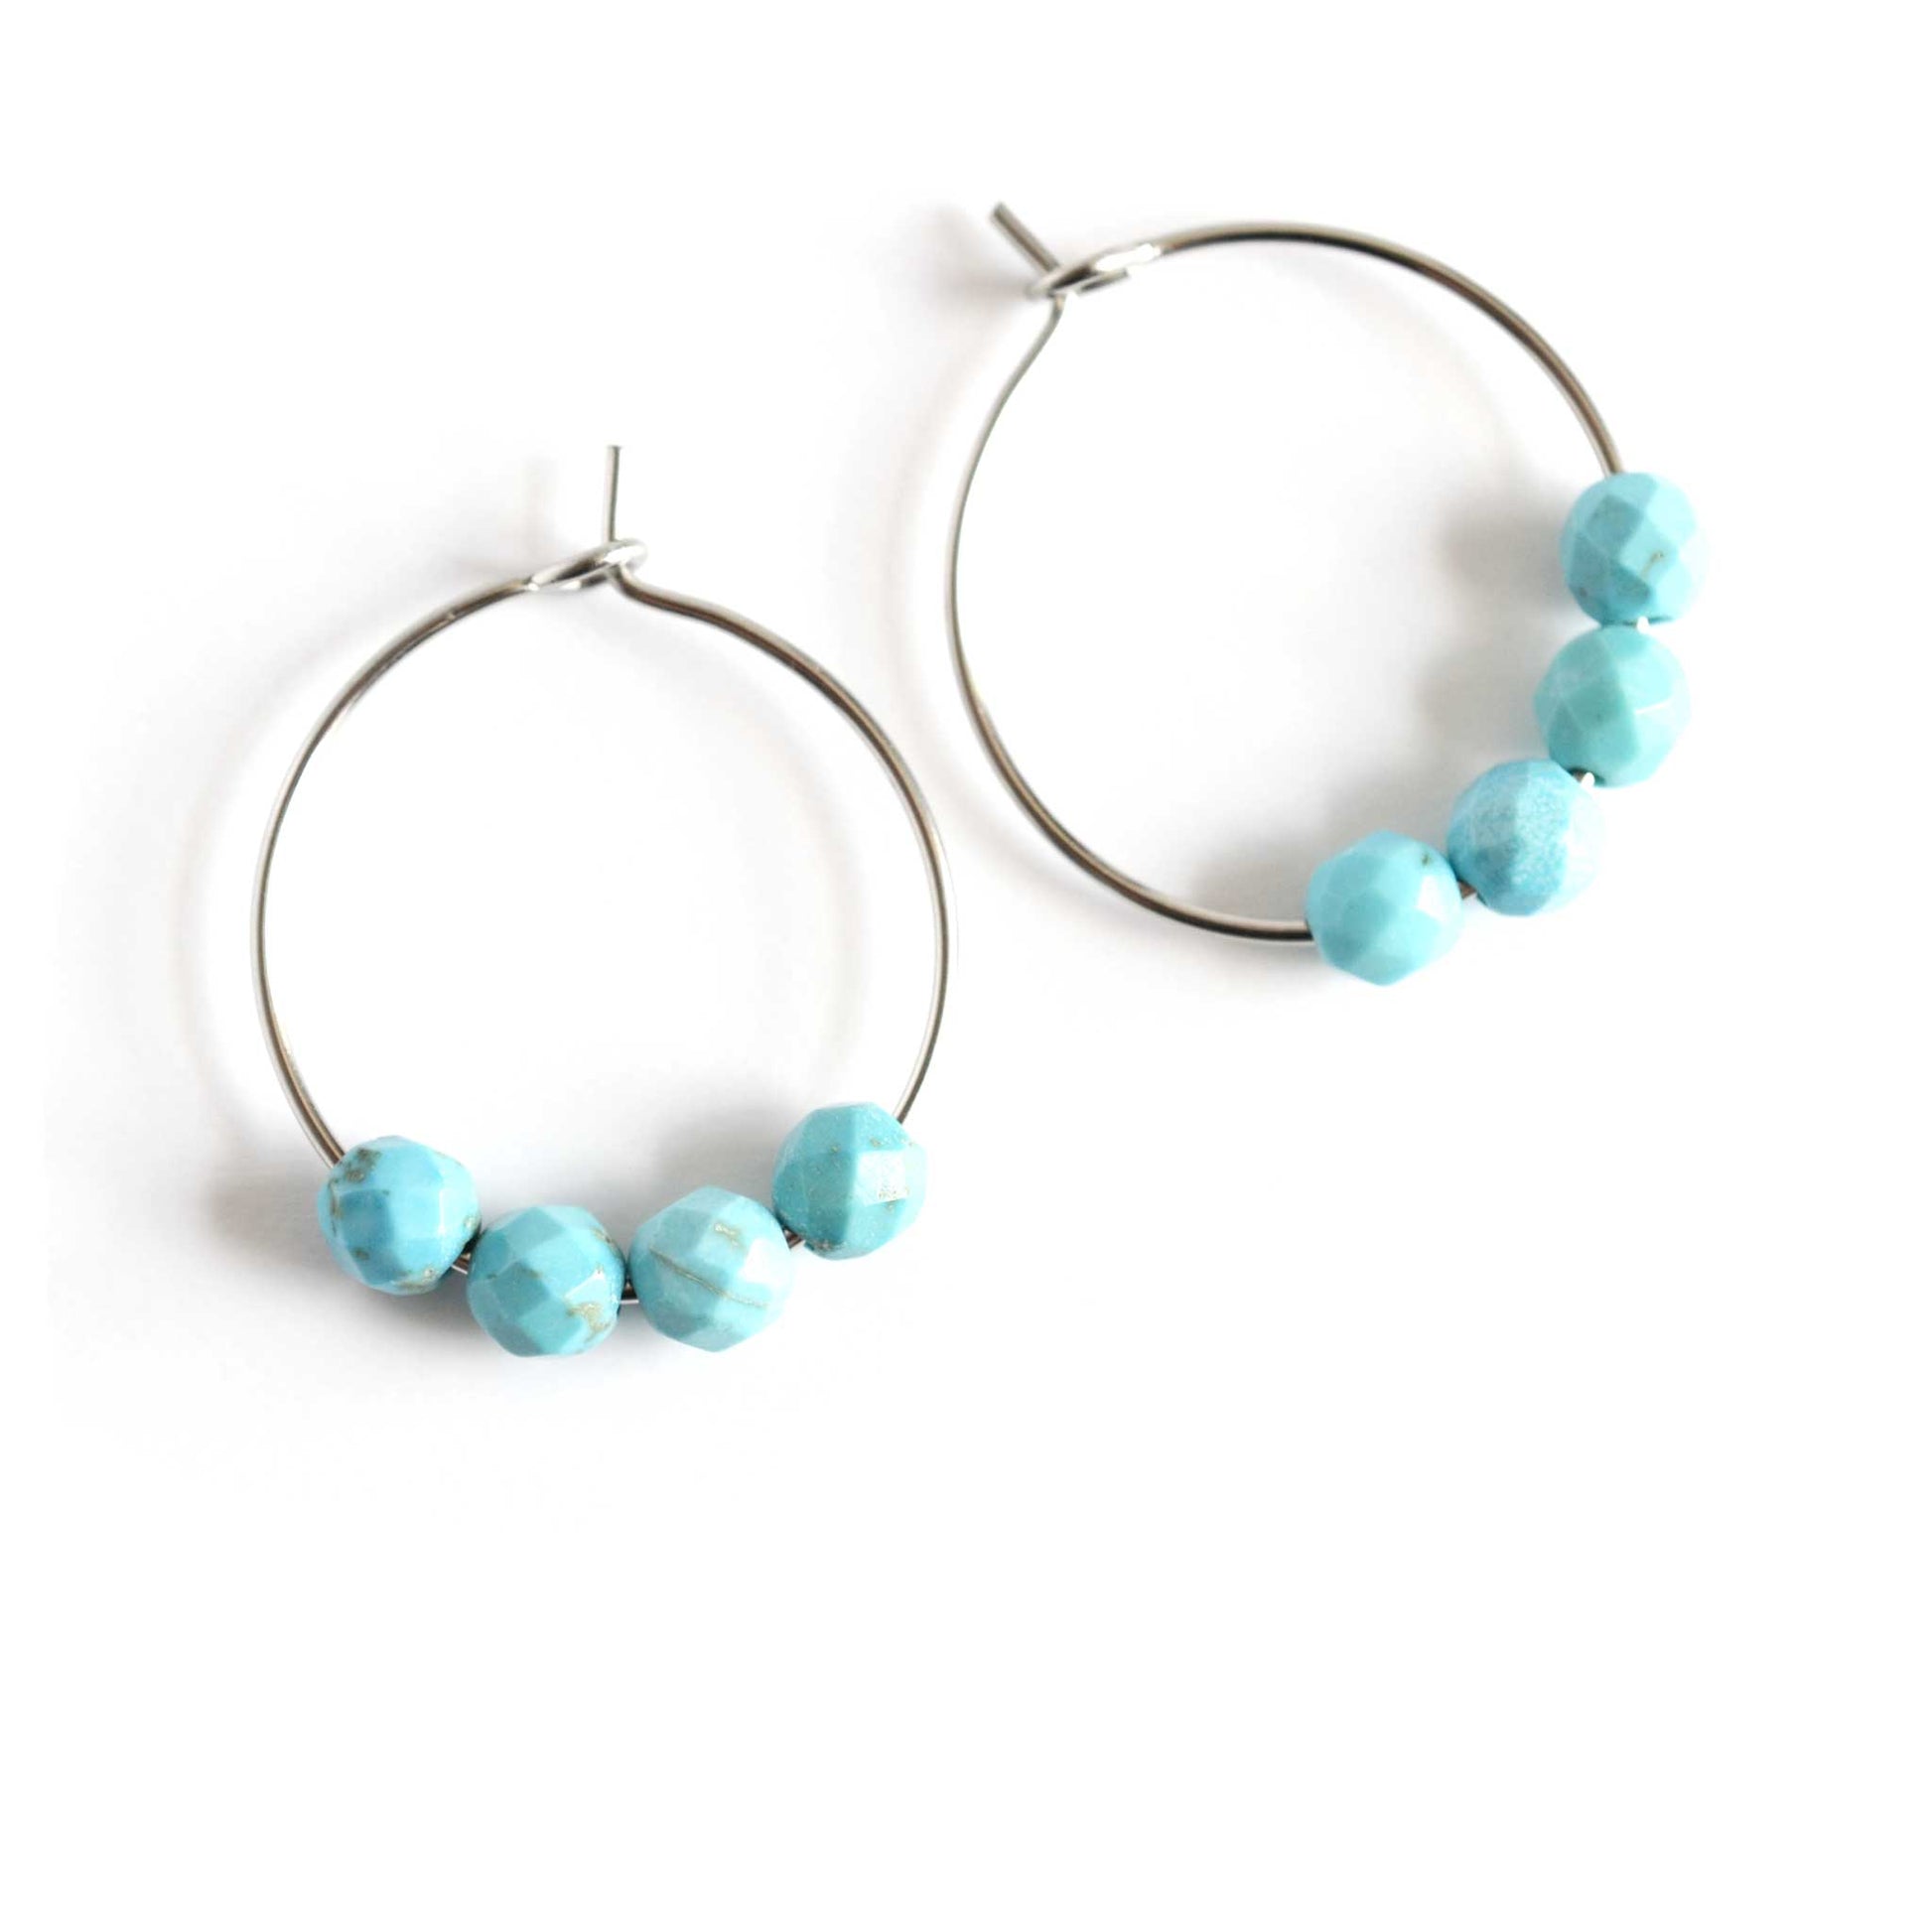 Pair of surgical steel hoop earrings with Turquoise gemstones on white background